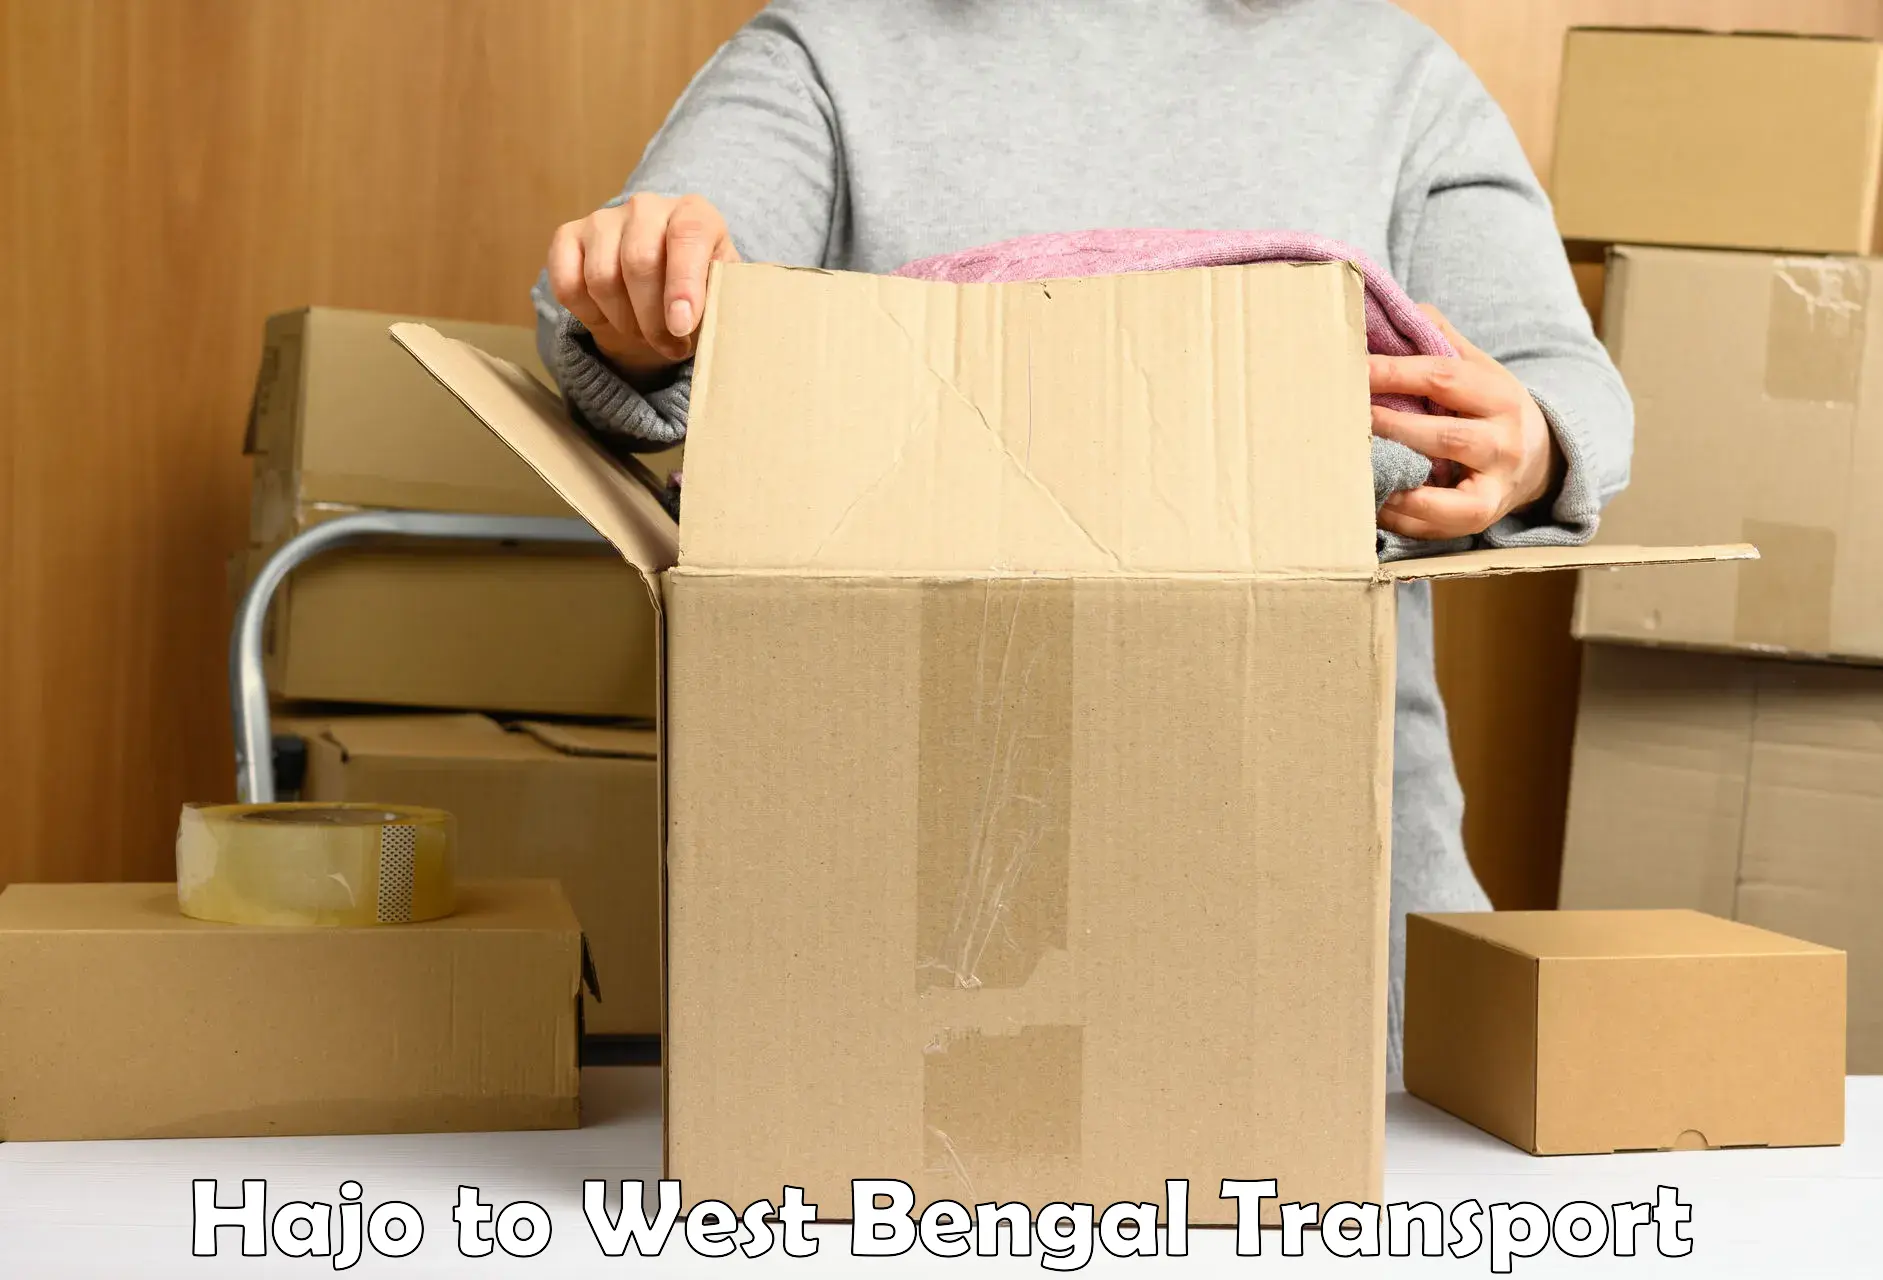 Container transport service Hajo to West Bengal